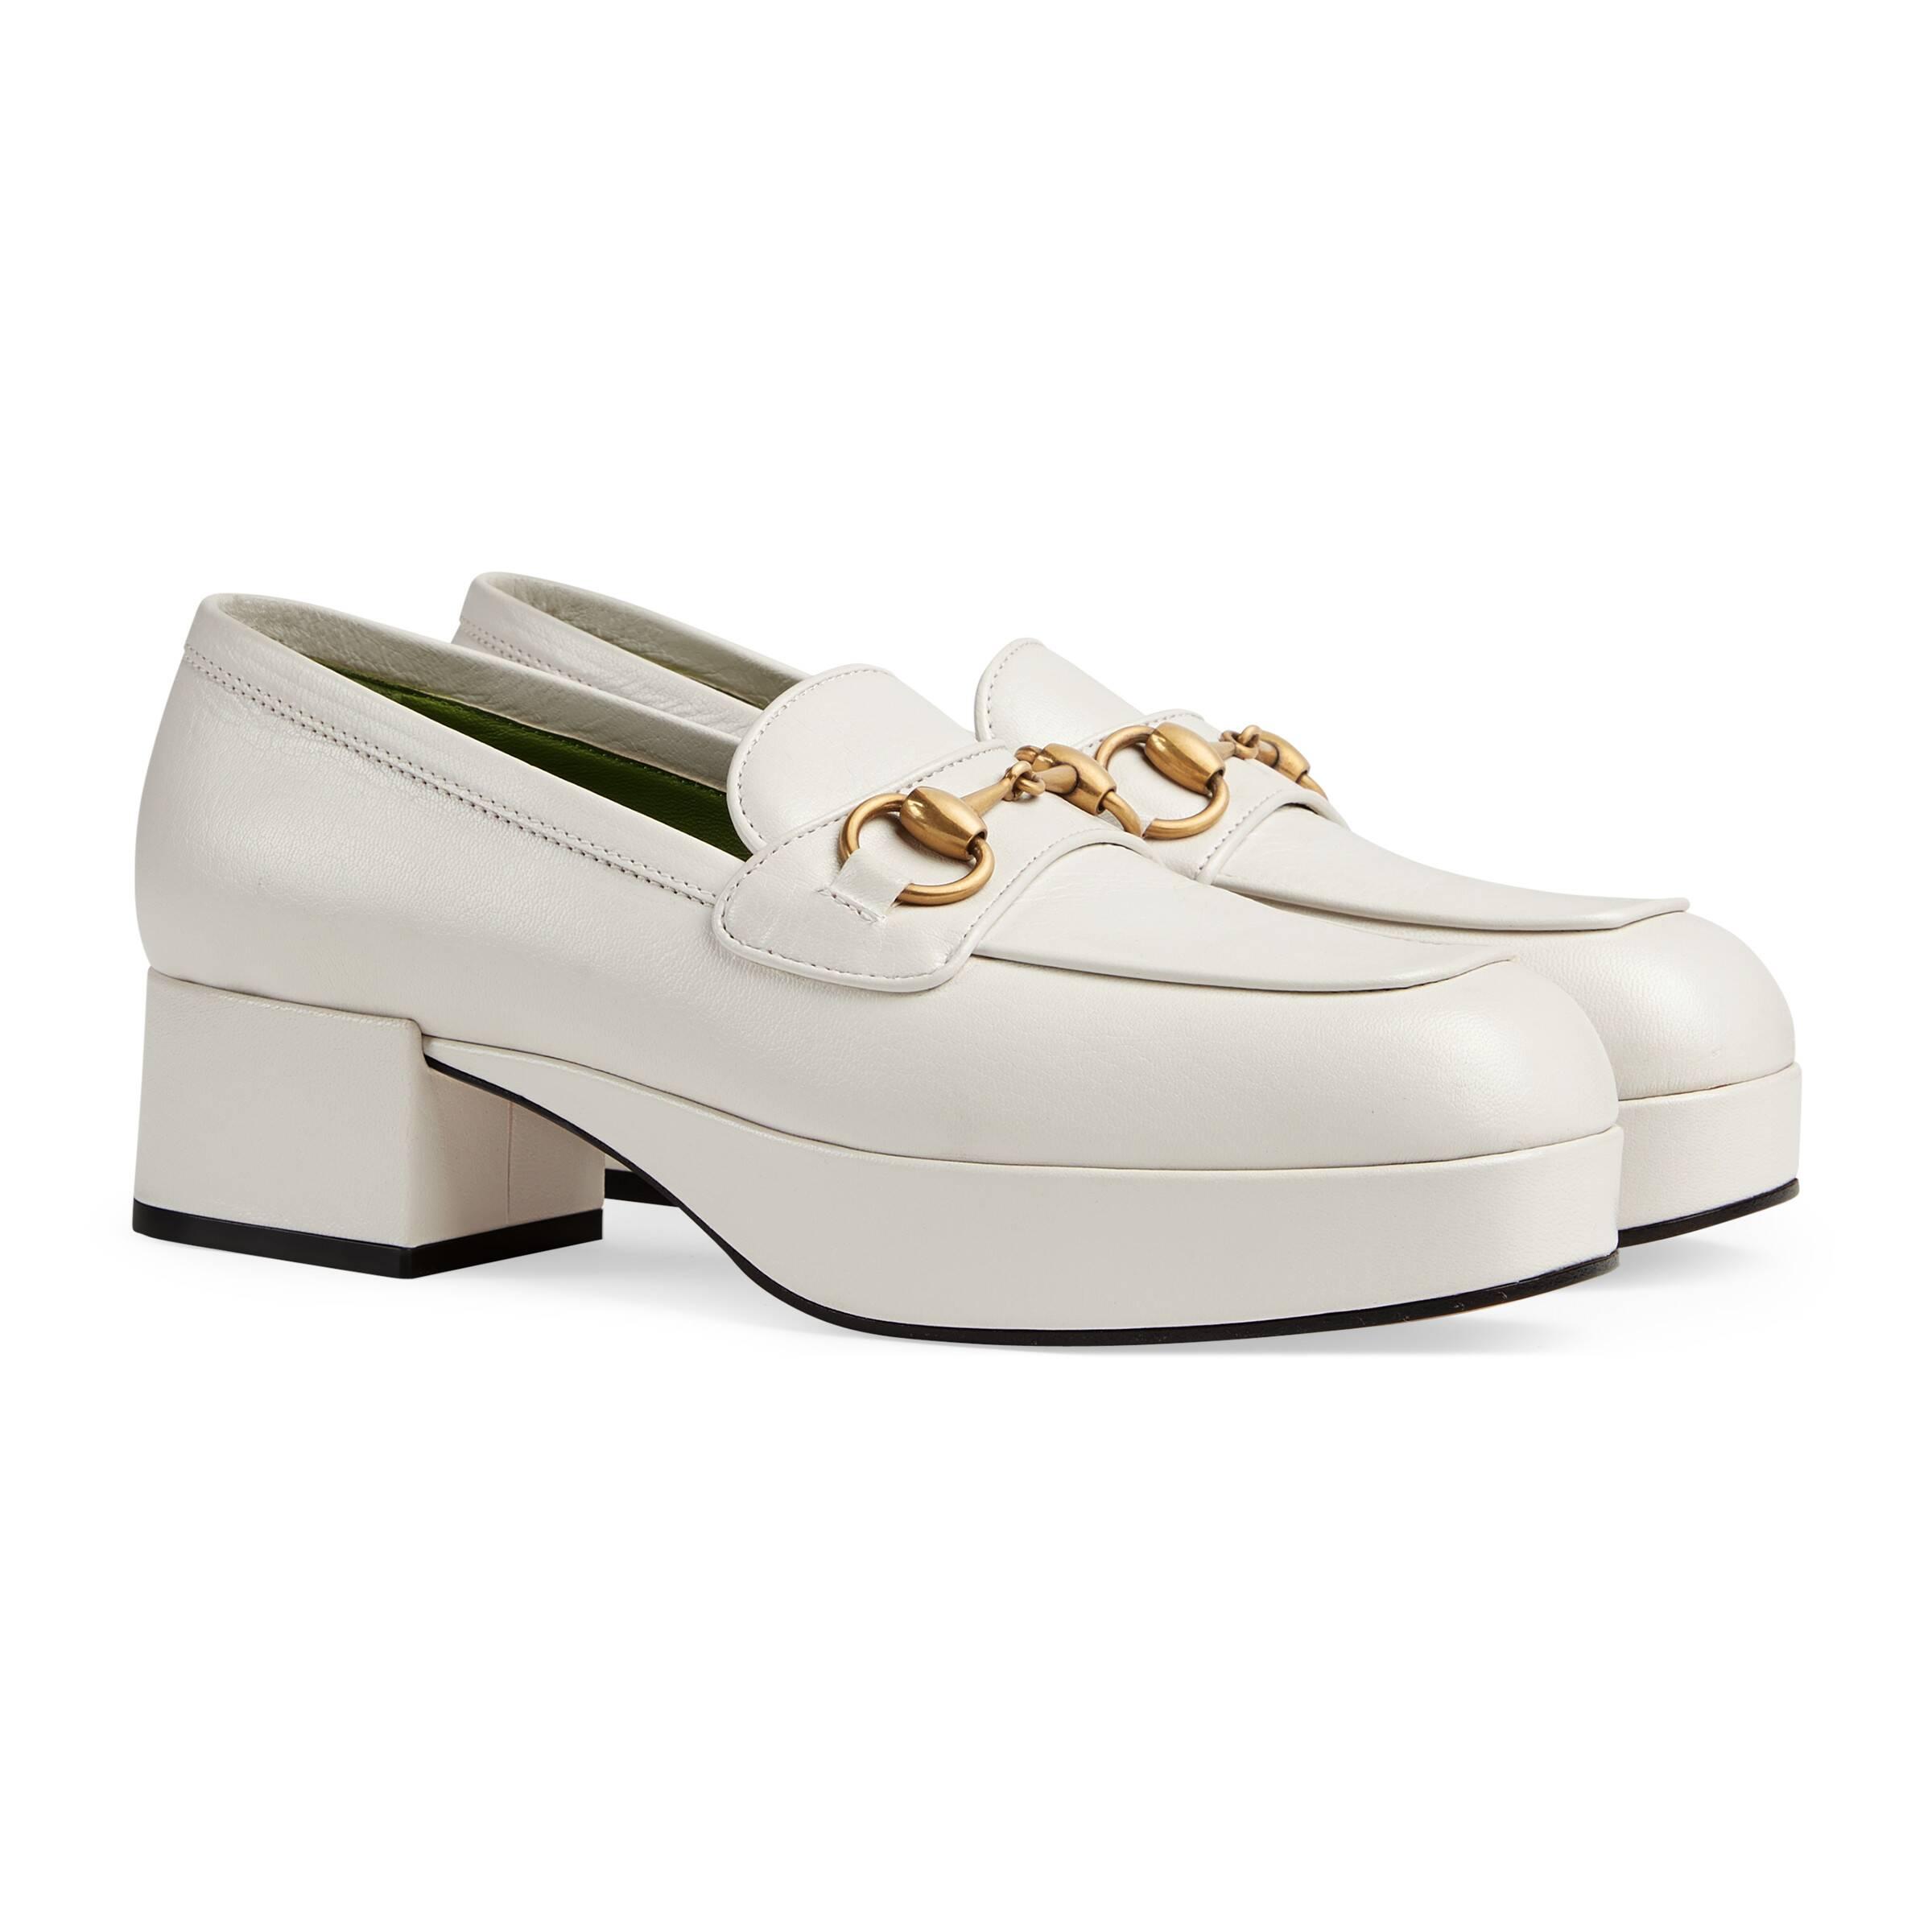 Gucci Leather Horsebit Platform Loafers in White Leather (White) - Lyst